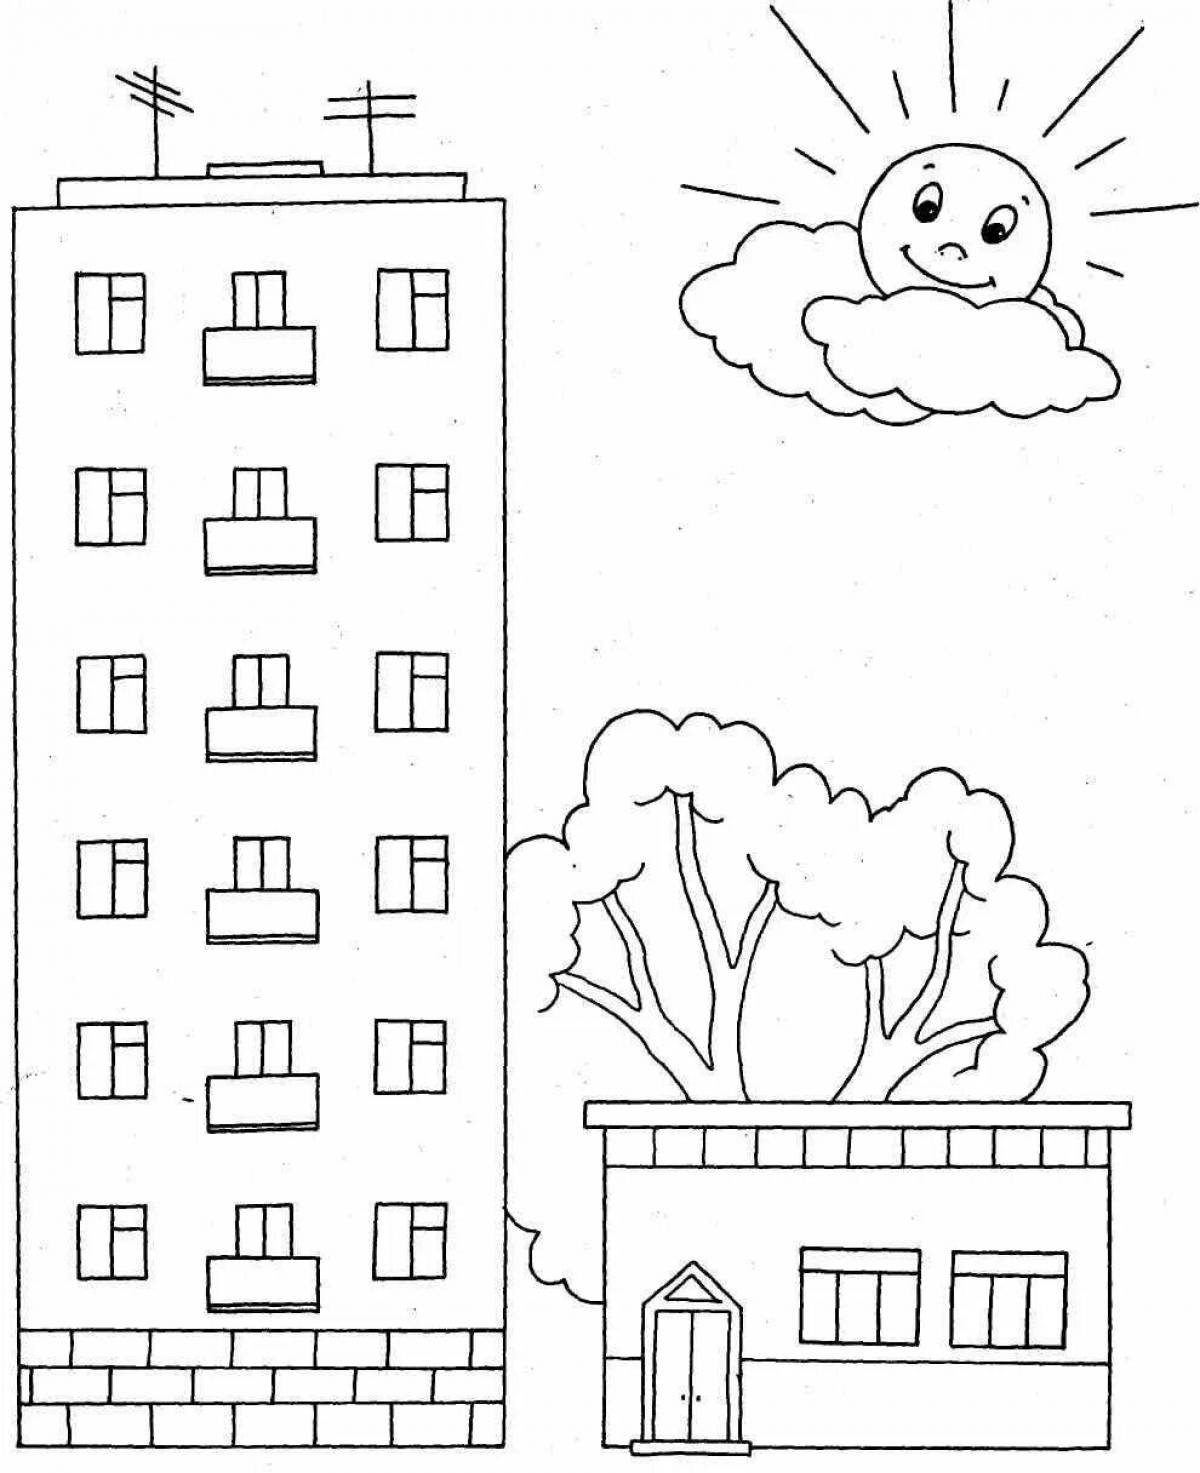 Fine high rise buildings coloring book for kids